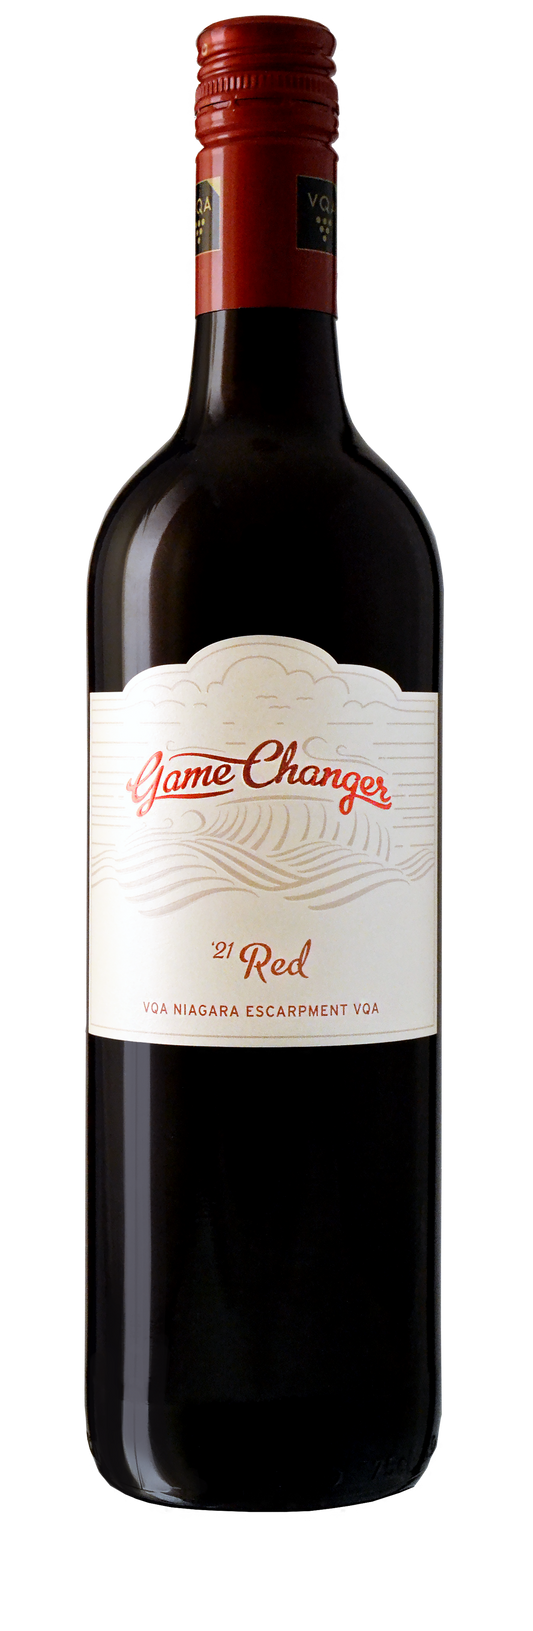 Game Changer Red